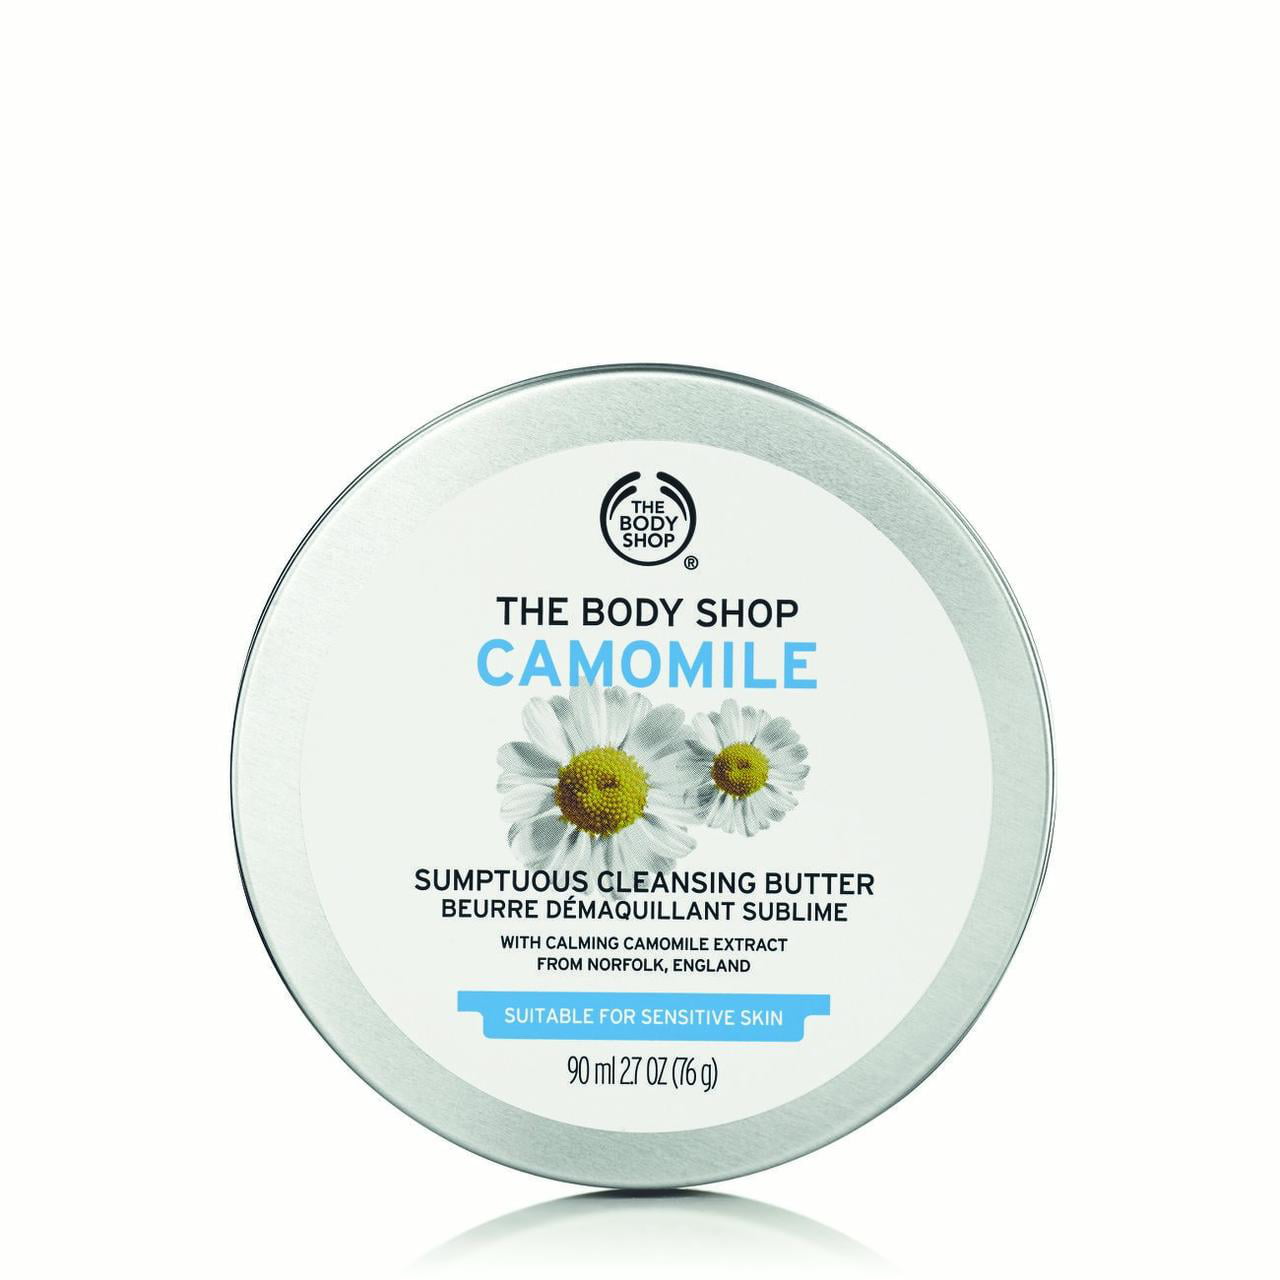 The Body Shop Camomile Cleansing Butter, 2.7 Oz - Walmart.com